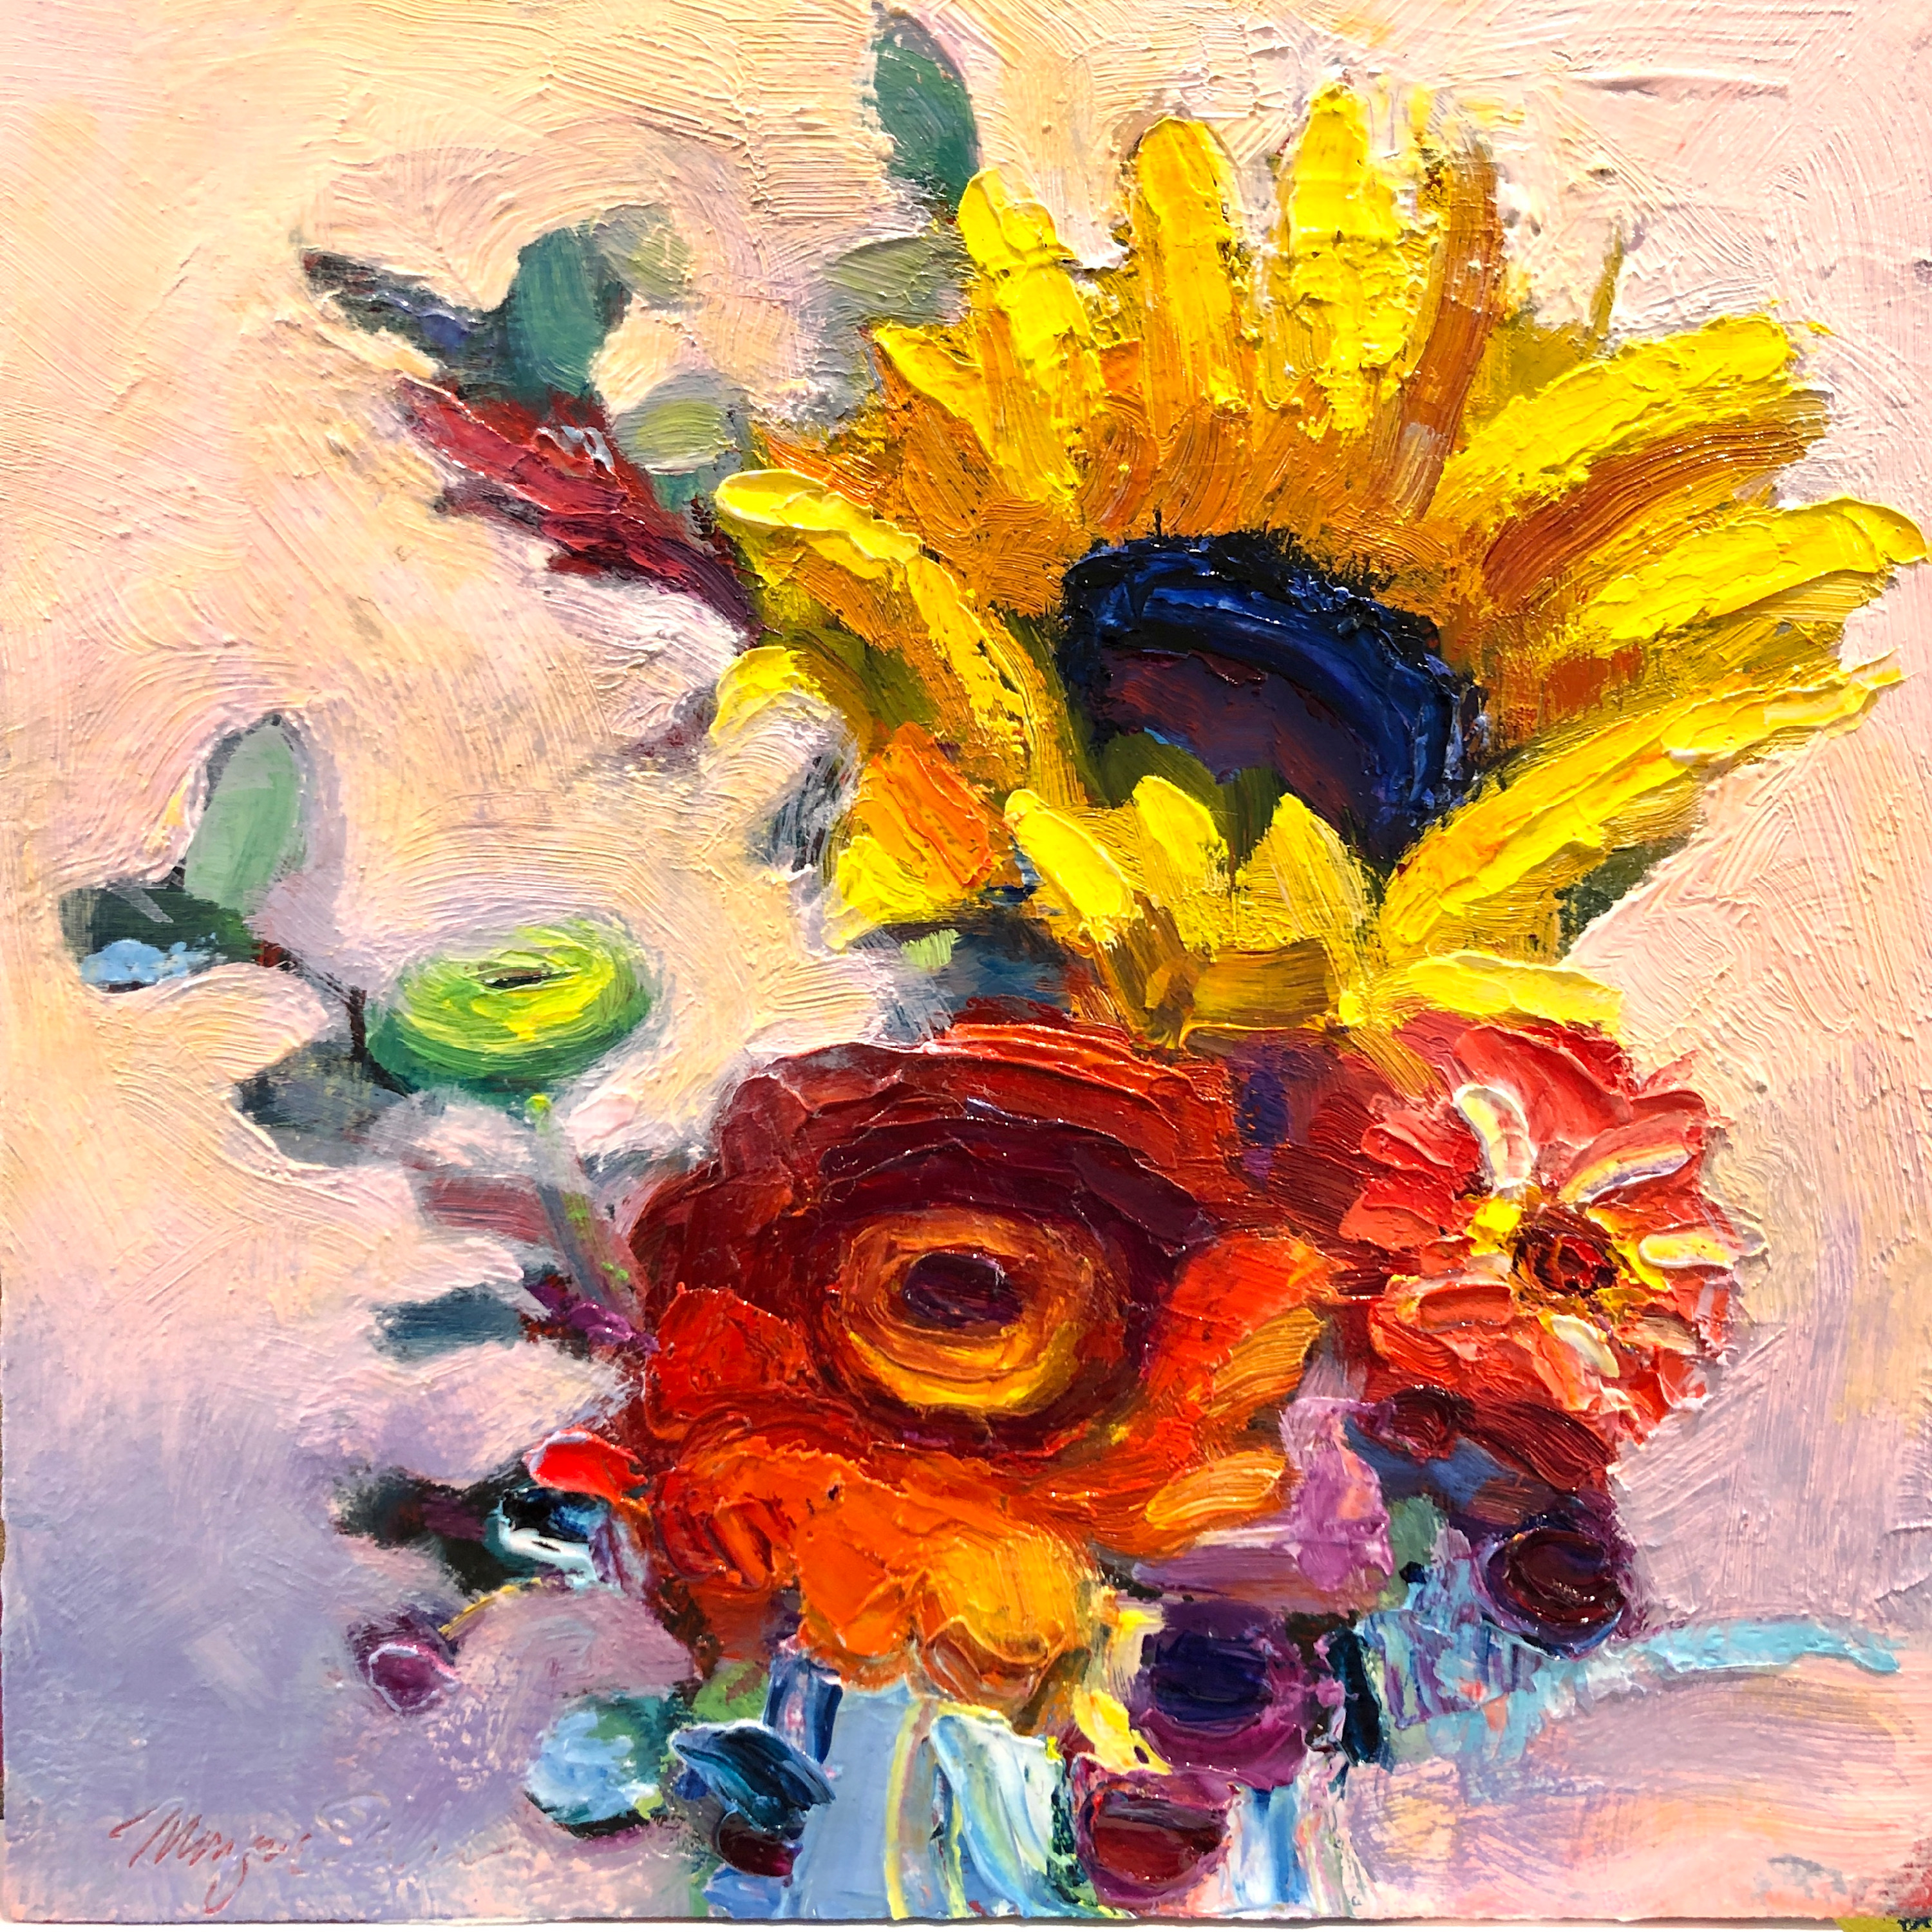 Together still life with red gerbera daisies zinnia and sunflower 2 oil 8x8 a9kqe2